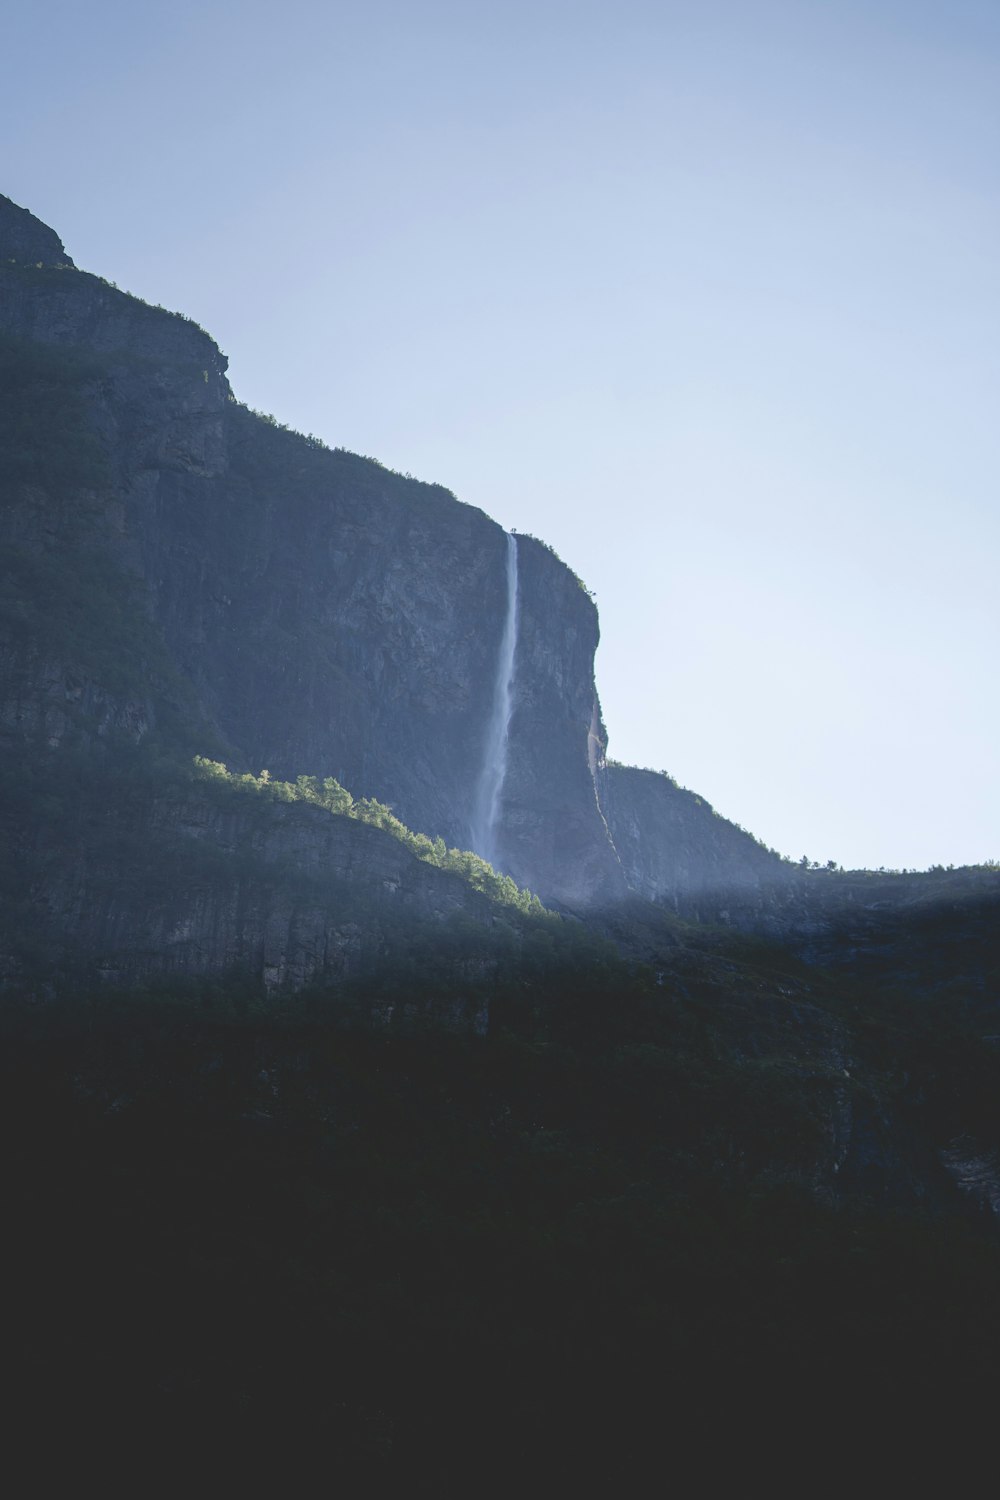 a waterfall is seen from the side of a mountain